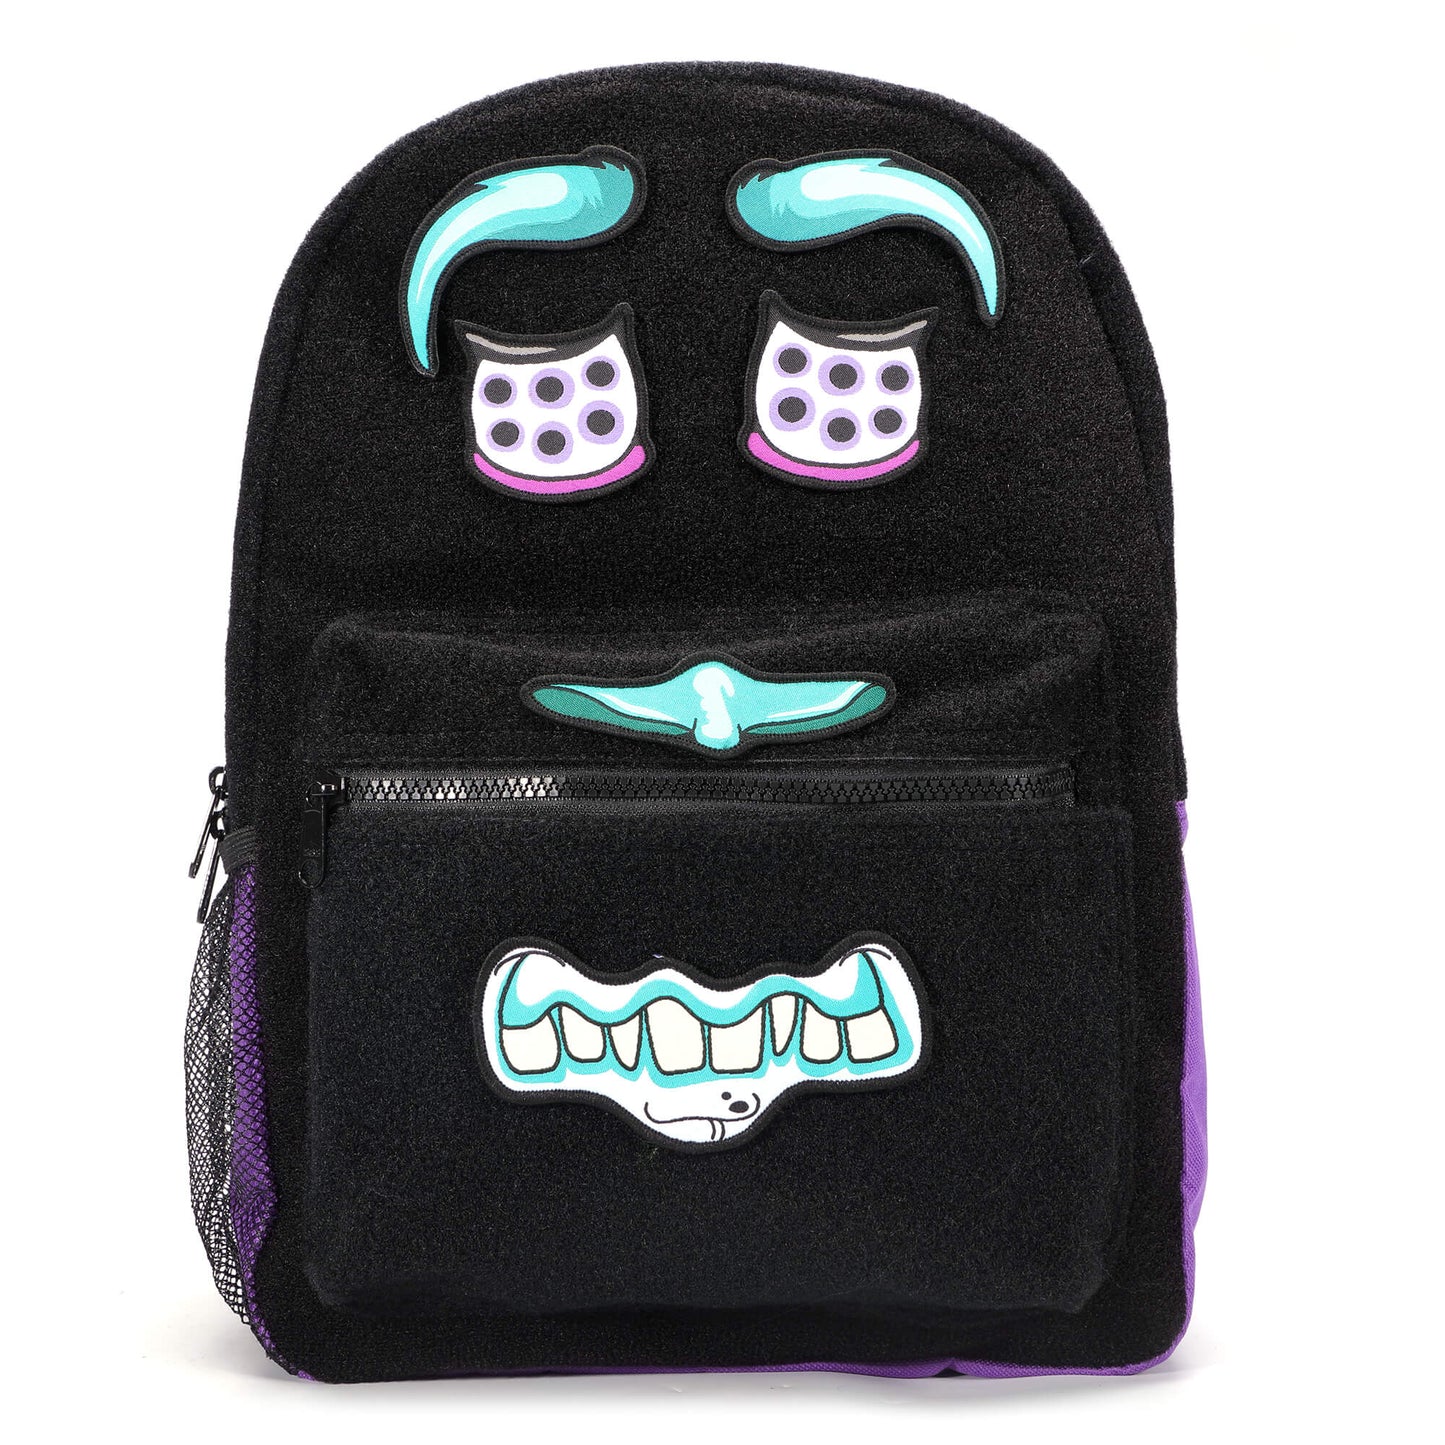 A backpack for kids with a playful and happy monster character design, featuring multiple pockets and a comfortable padded back.